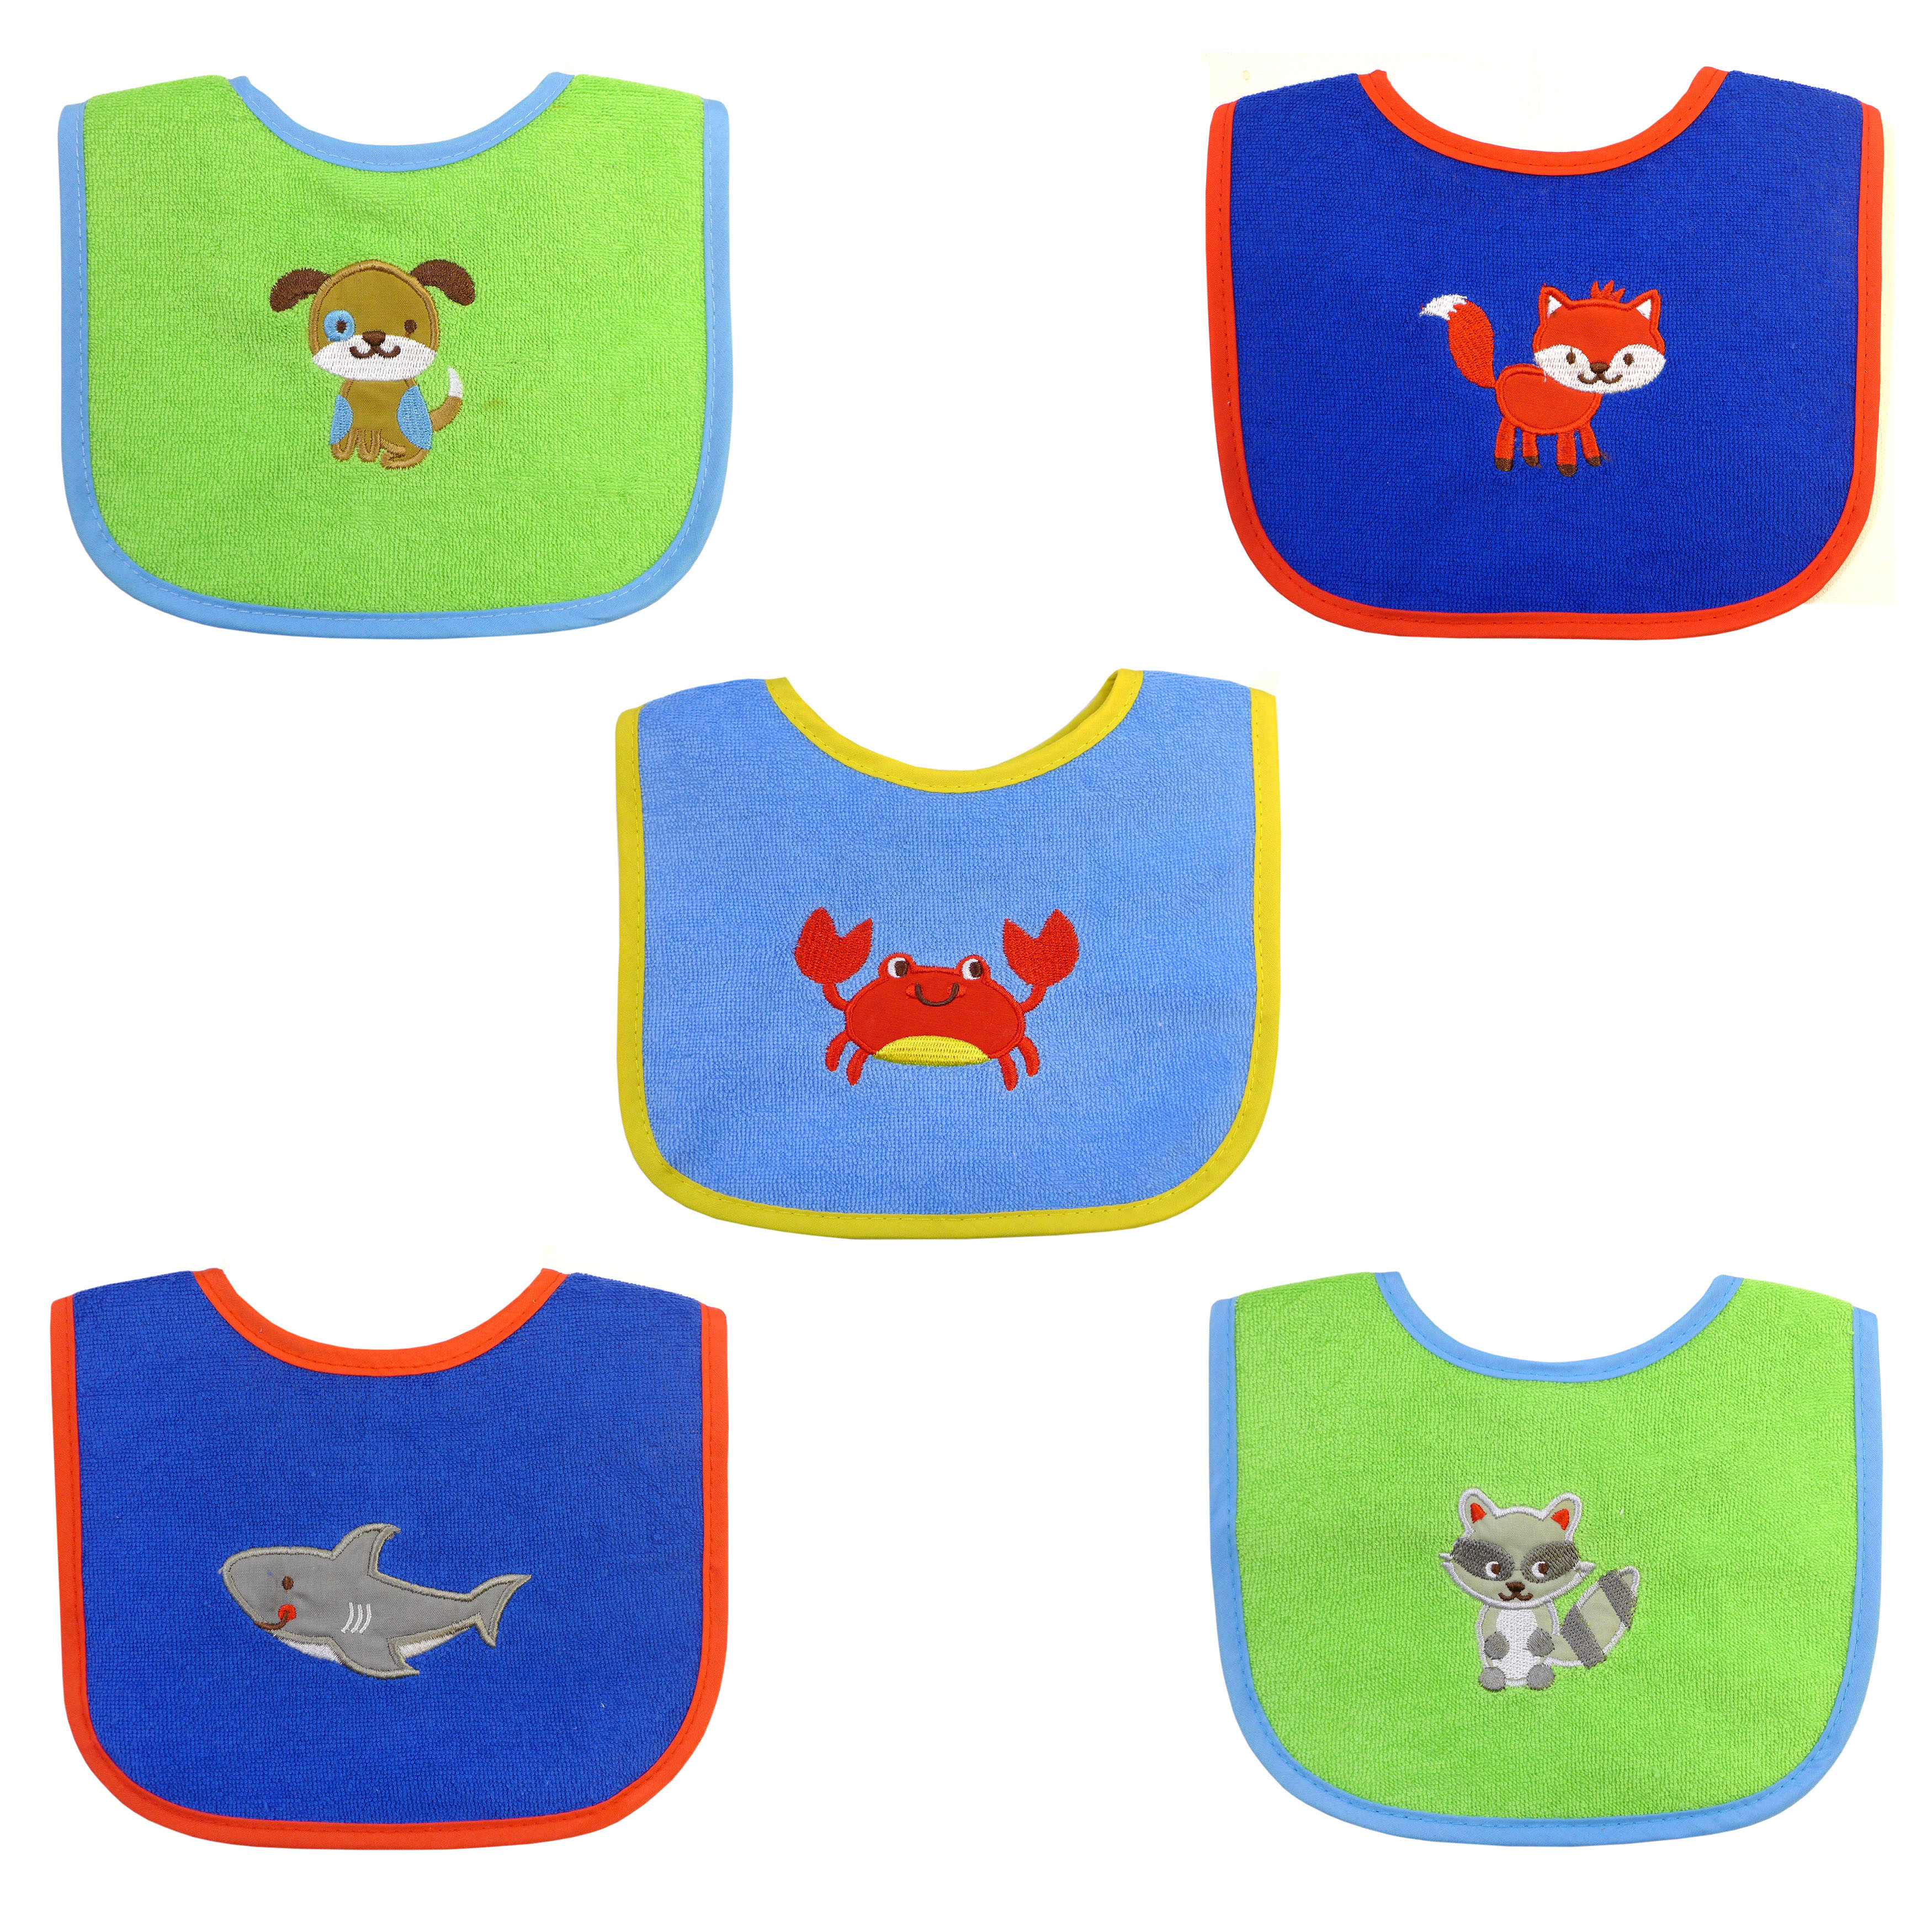 Neat Solutions Cotton and Polyester Baby Bib, 10pk Boys - image 2 of 12